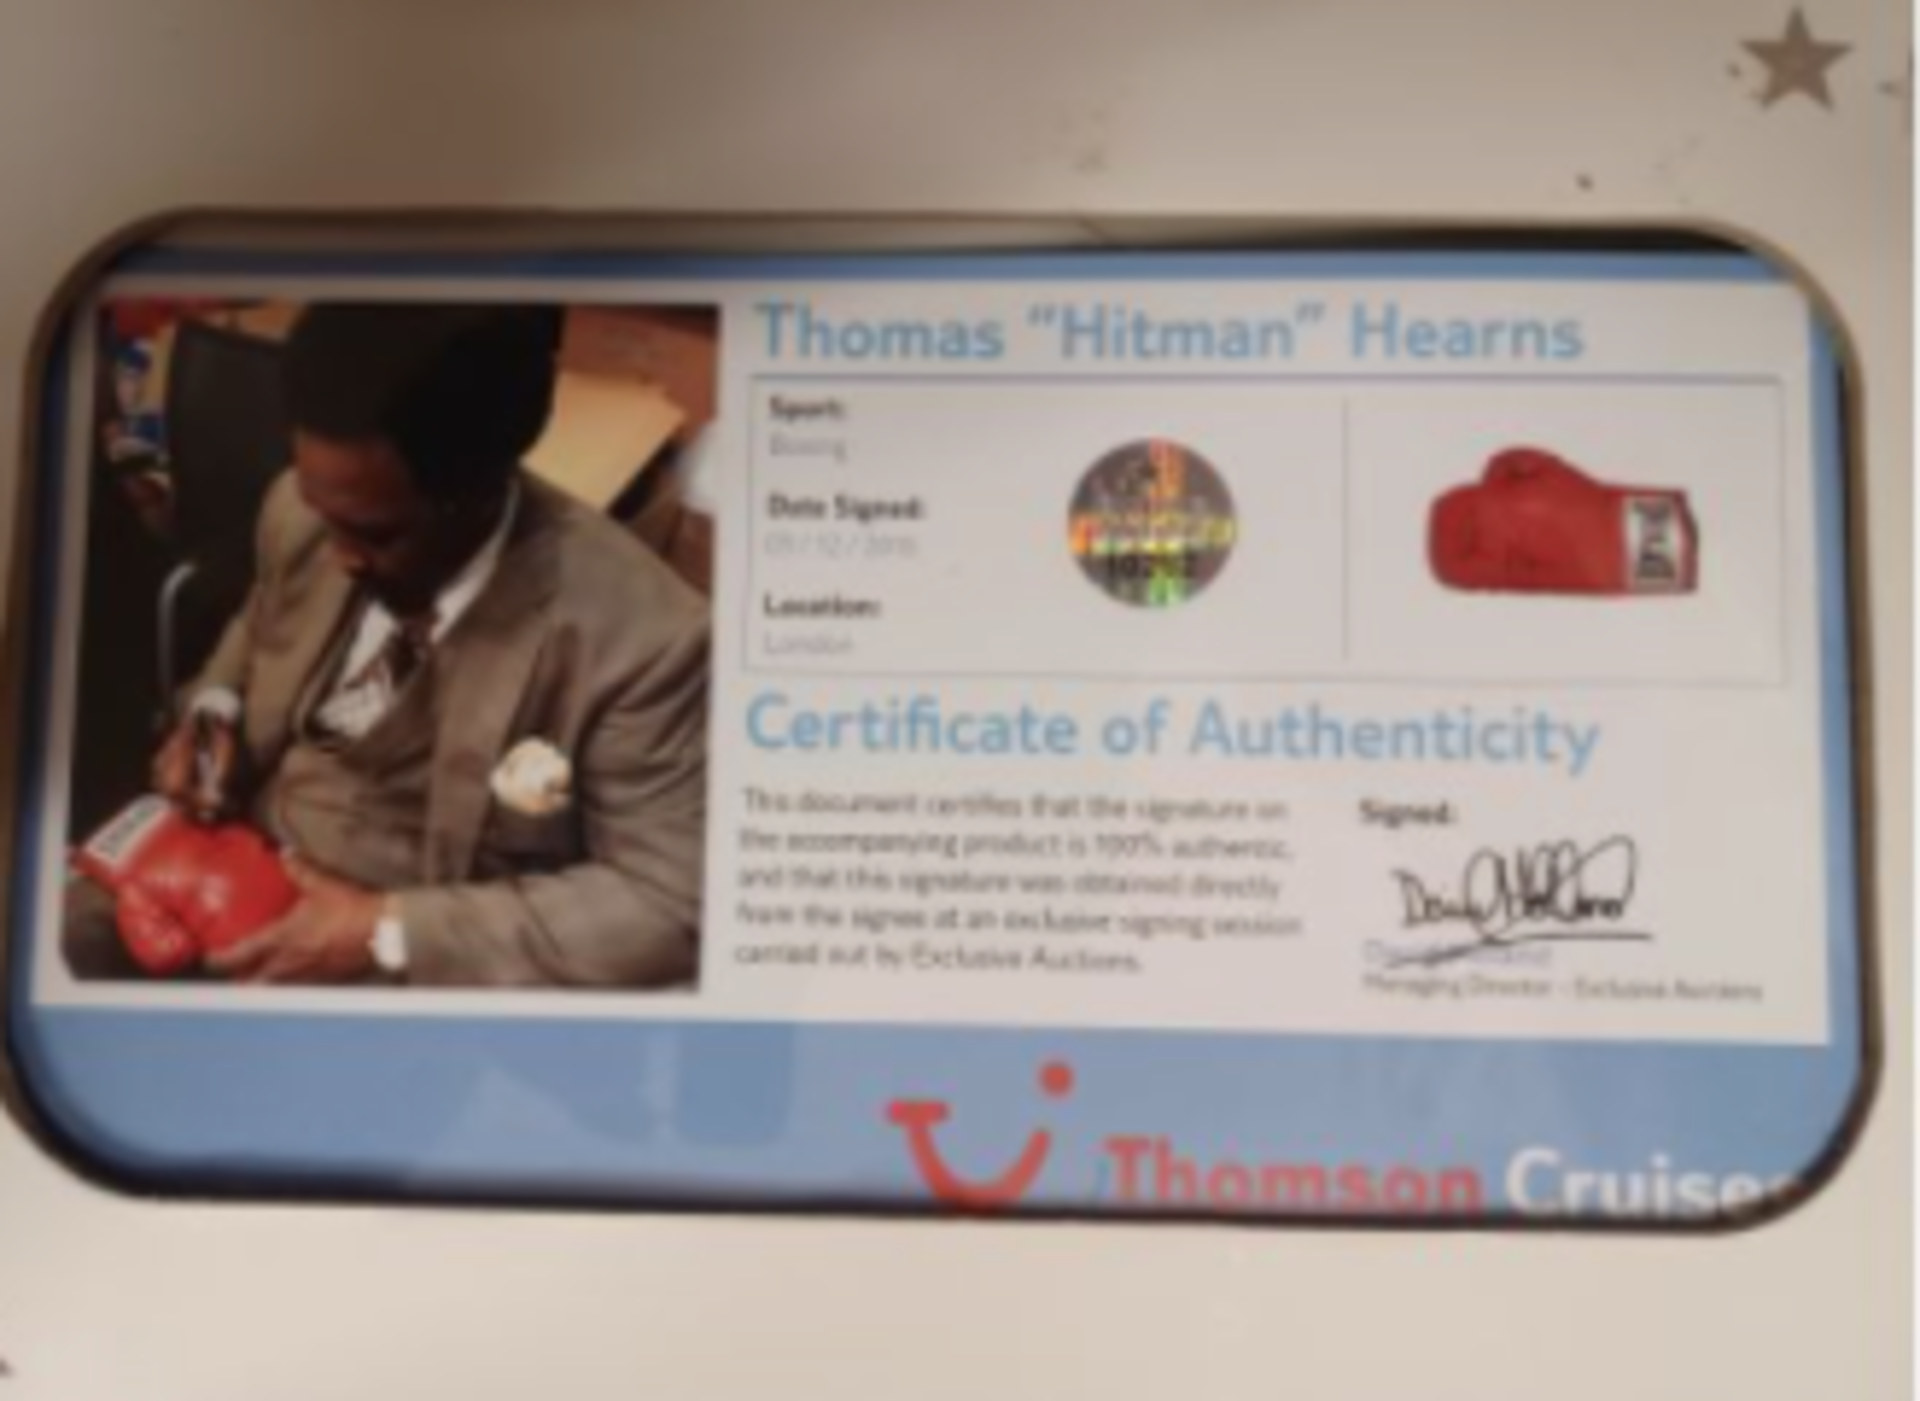 Authentic Thomas "Hitman" Hearns Signed Boxing Glove - Image 2 of 2